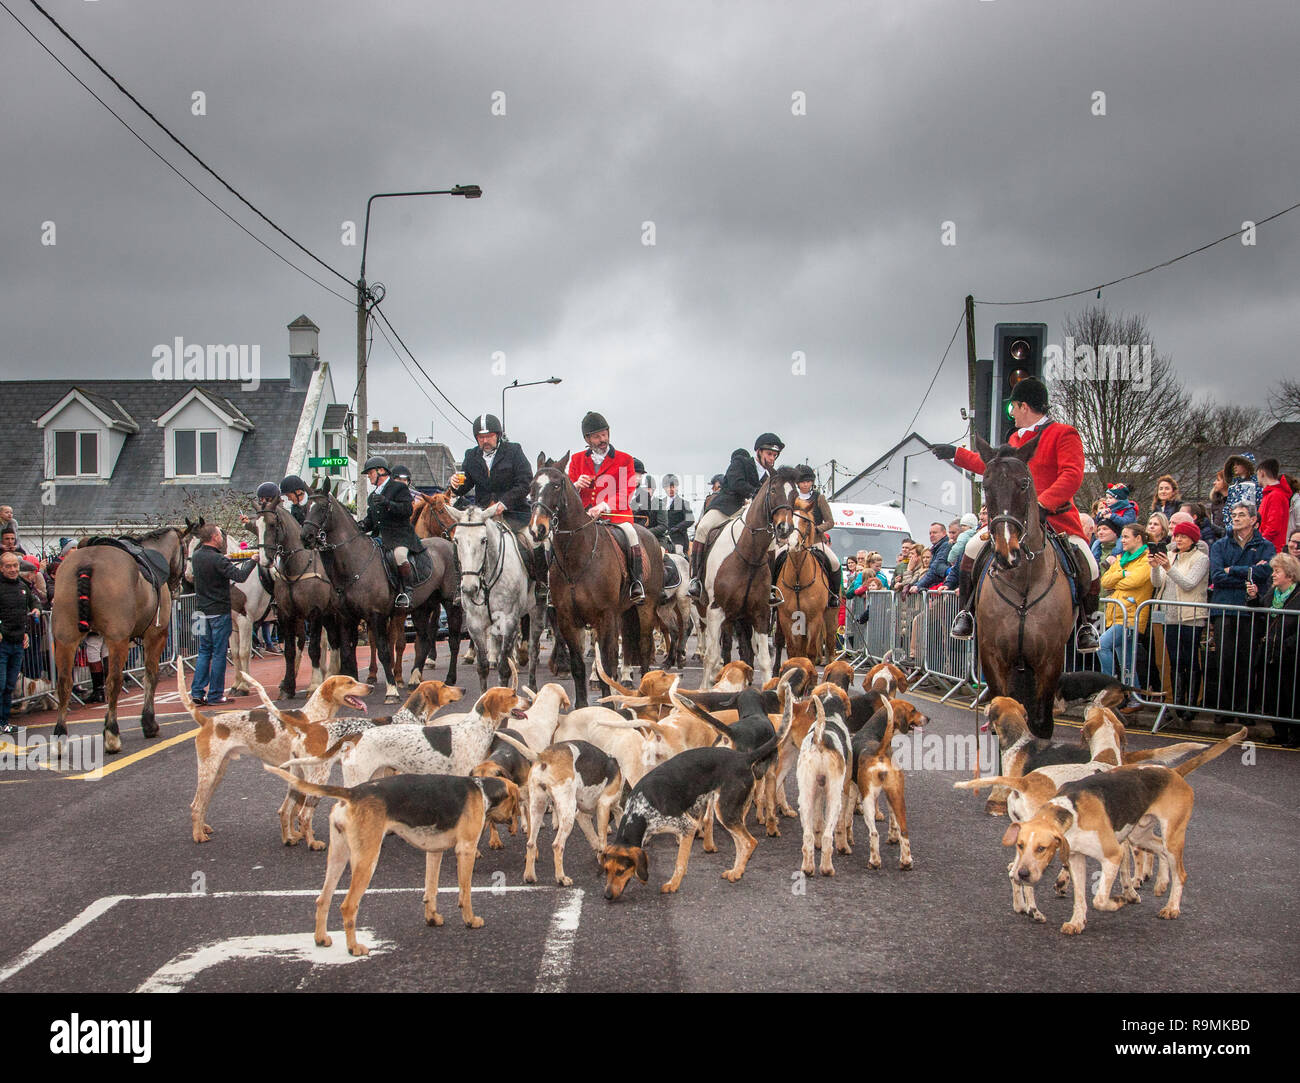 Carrigaline, Cork, Ireland. 26th December, 2018. Members of the South Union Hunt gather  with their hounds for the traditional St Stephen's Day Hunt on Main Street Carrigaline, Co. Cork, Ireland. Credit: David Creedon/Alamy Live News Stock Photo